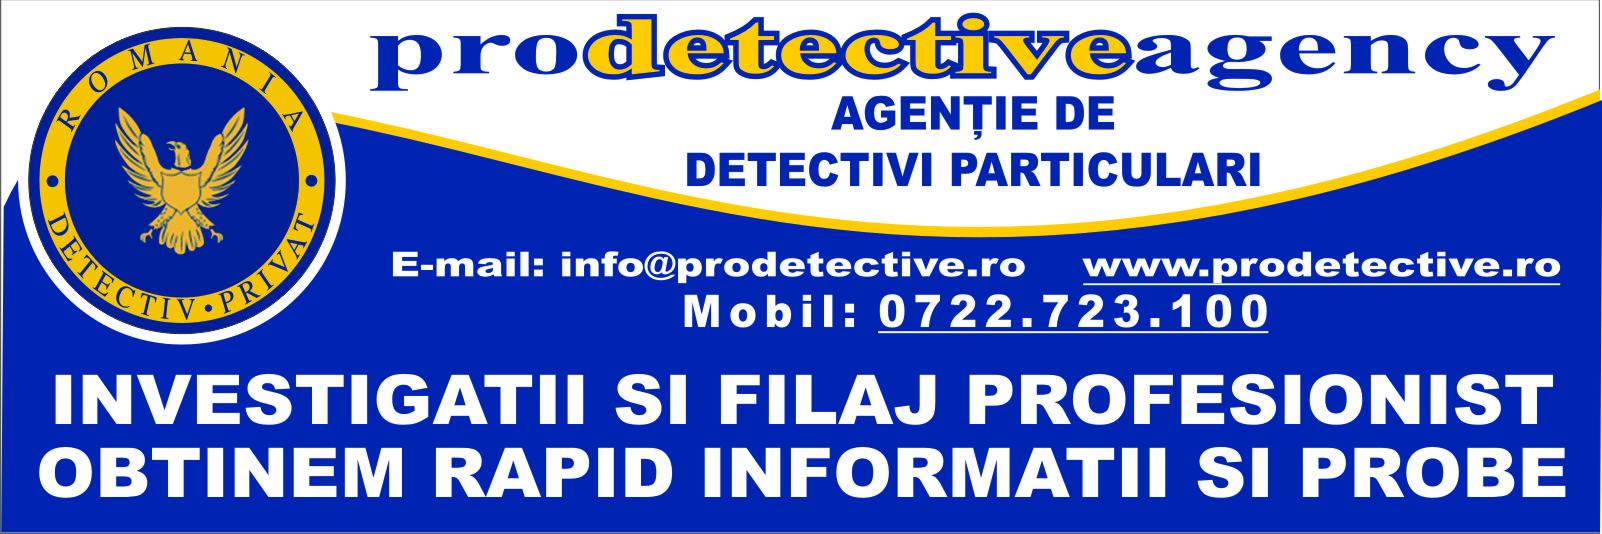 banner new pro detective agency